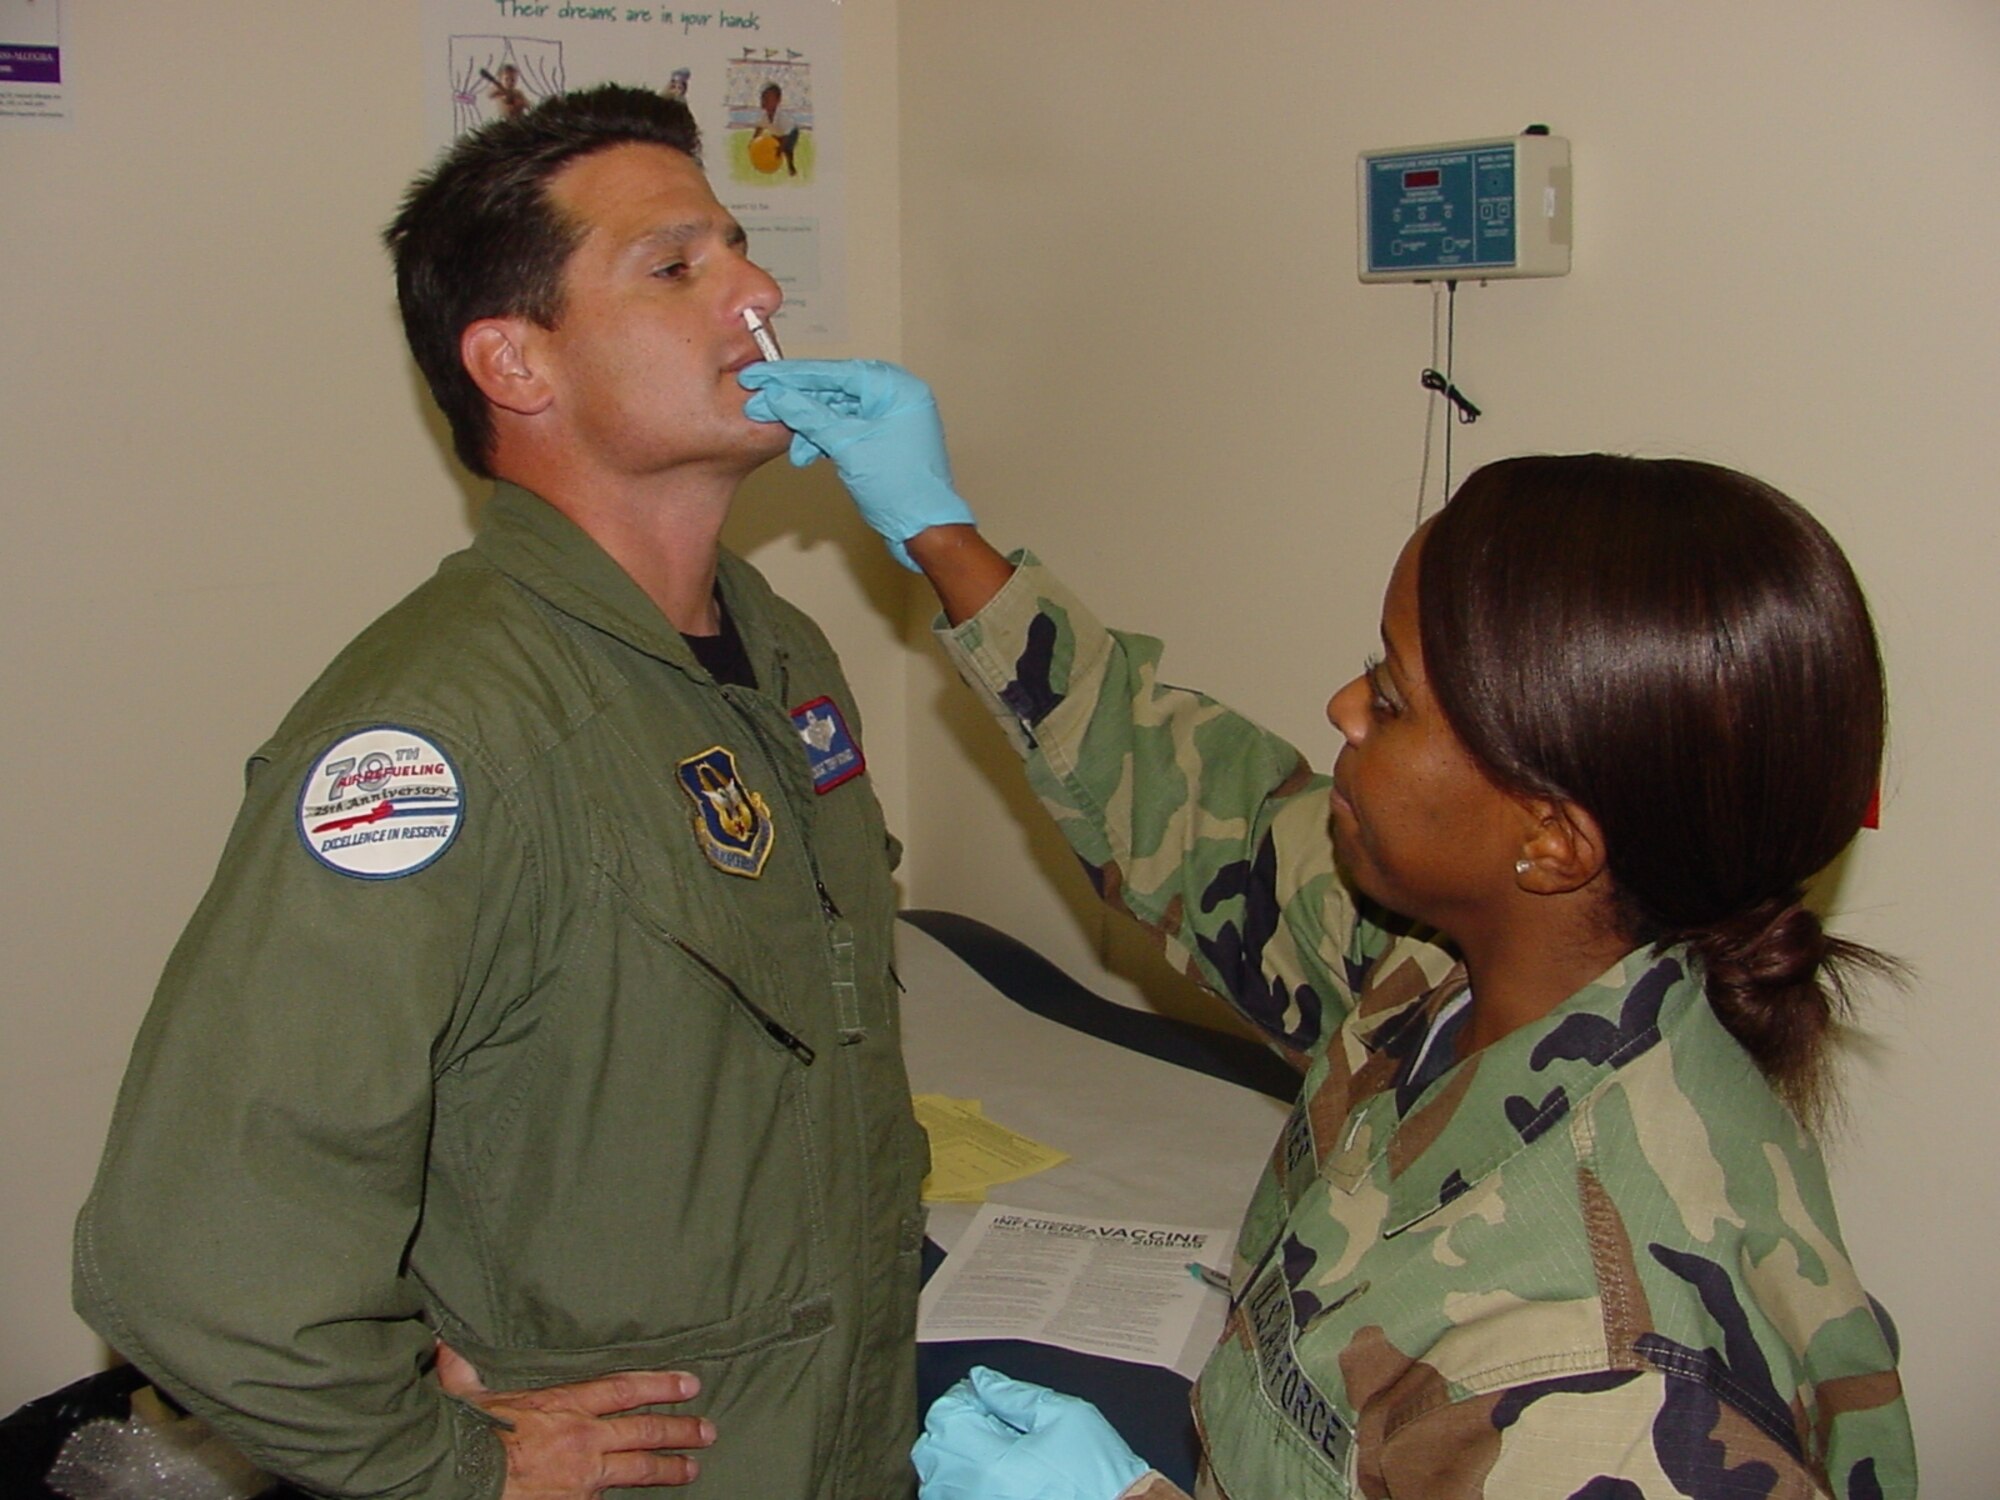 Chief Master Sgt. Terry Monges from the 79th Aerial Refueling Squadron receives a flu vaccine by mist inhalant from Staff Sgt. Dorcas Stokes, 60th Medical Operations Squadron Allergy/Immunization Clinic technician at the David Grant USAF Medical Center. The influenza vaccine is a mandatory DOD requirement for all military personnel. The flu vaccine will be given out Sept. 30 through Oct.3 from 9 a.m. to 3 p.m. for Active Duty at the Chapel One Annex, Nov. 12 through 14 from 9 a.m. to 3 p.m. for Active Duty and family members and every Wednesday beginning Oct. 15 at the Pediatric Clinic from 4 to 6 p.m. for families with children. (U.S. Air Force photo/Jim Spellman)